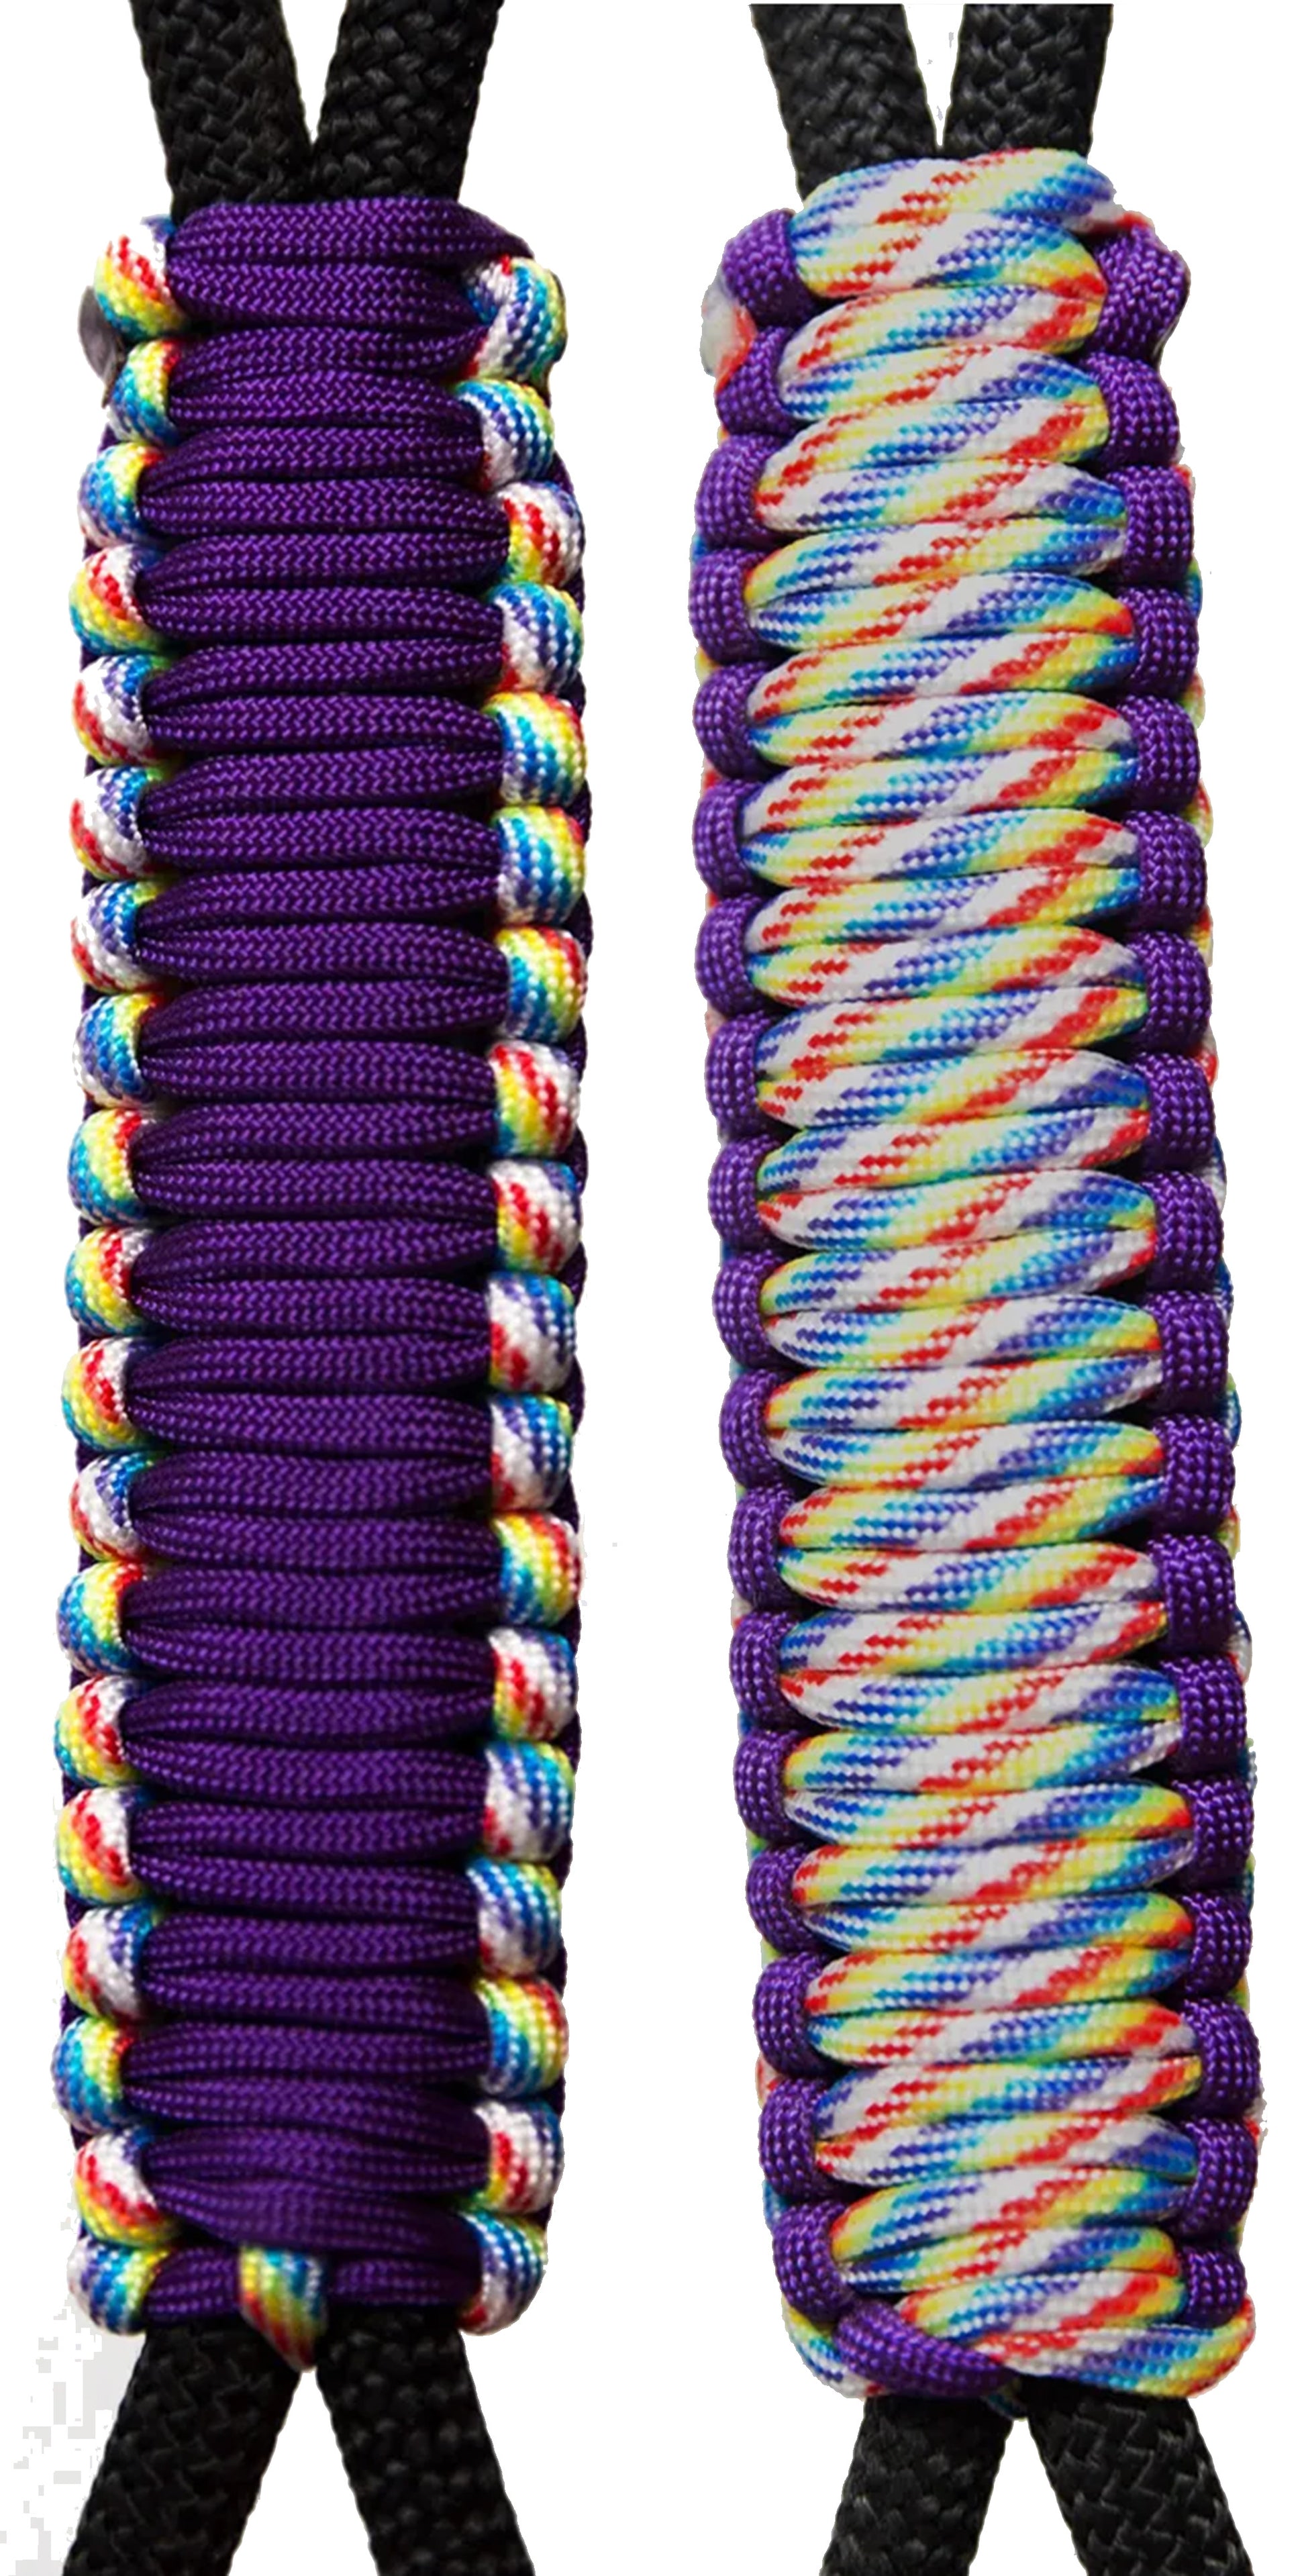 Purple & Rainbow -C024C050 - Paracord Handmade Handles for Stainless Steel Tumblers - Made in USA!